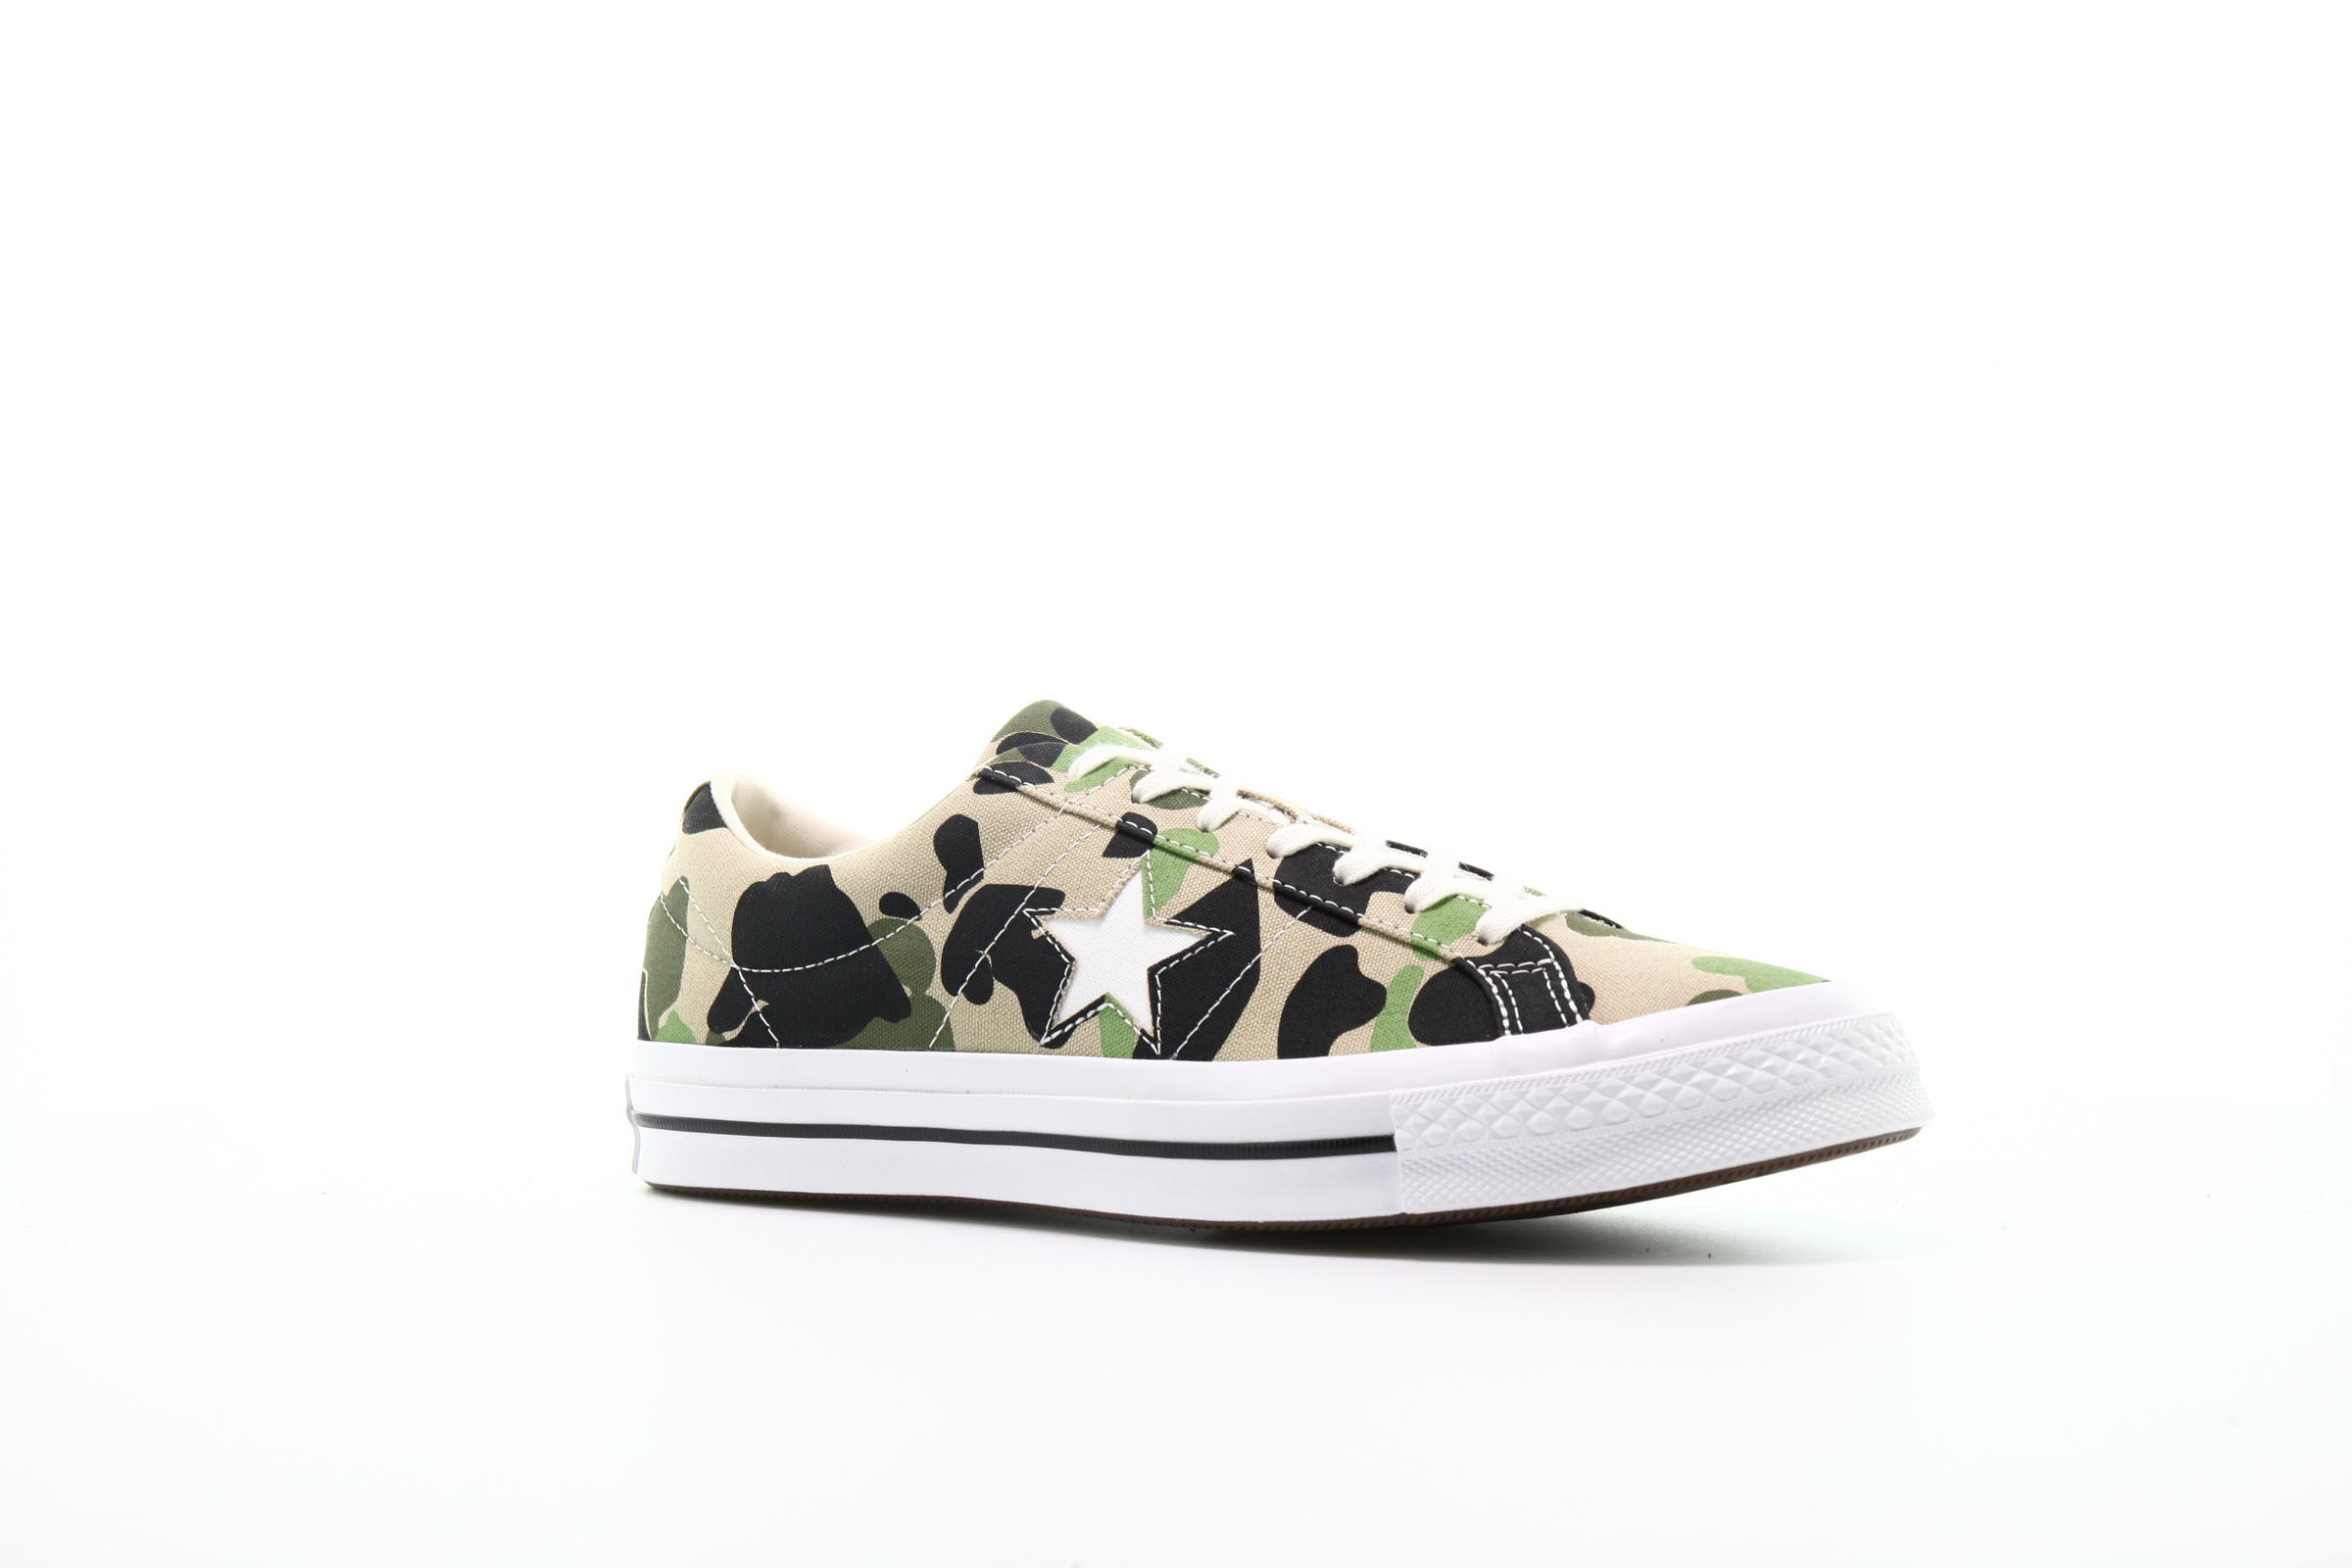 Converse One Star OX Archive Prints "Duck Camo"